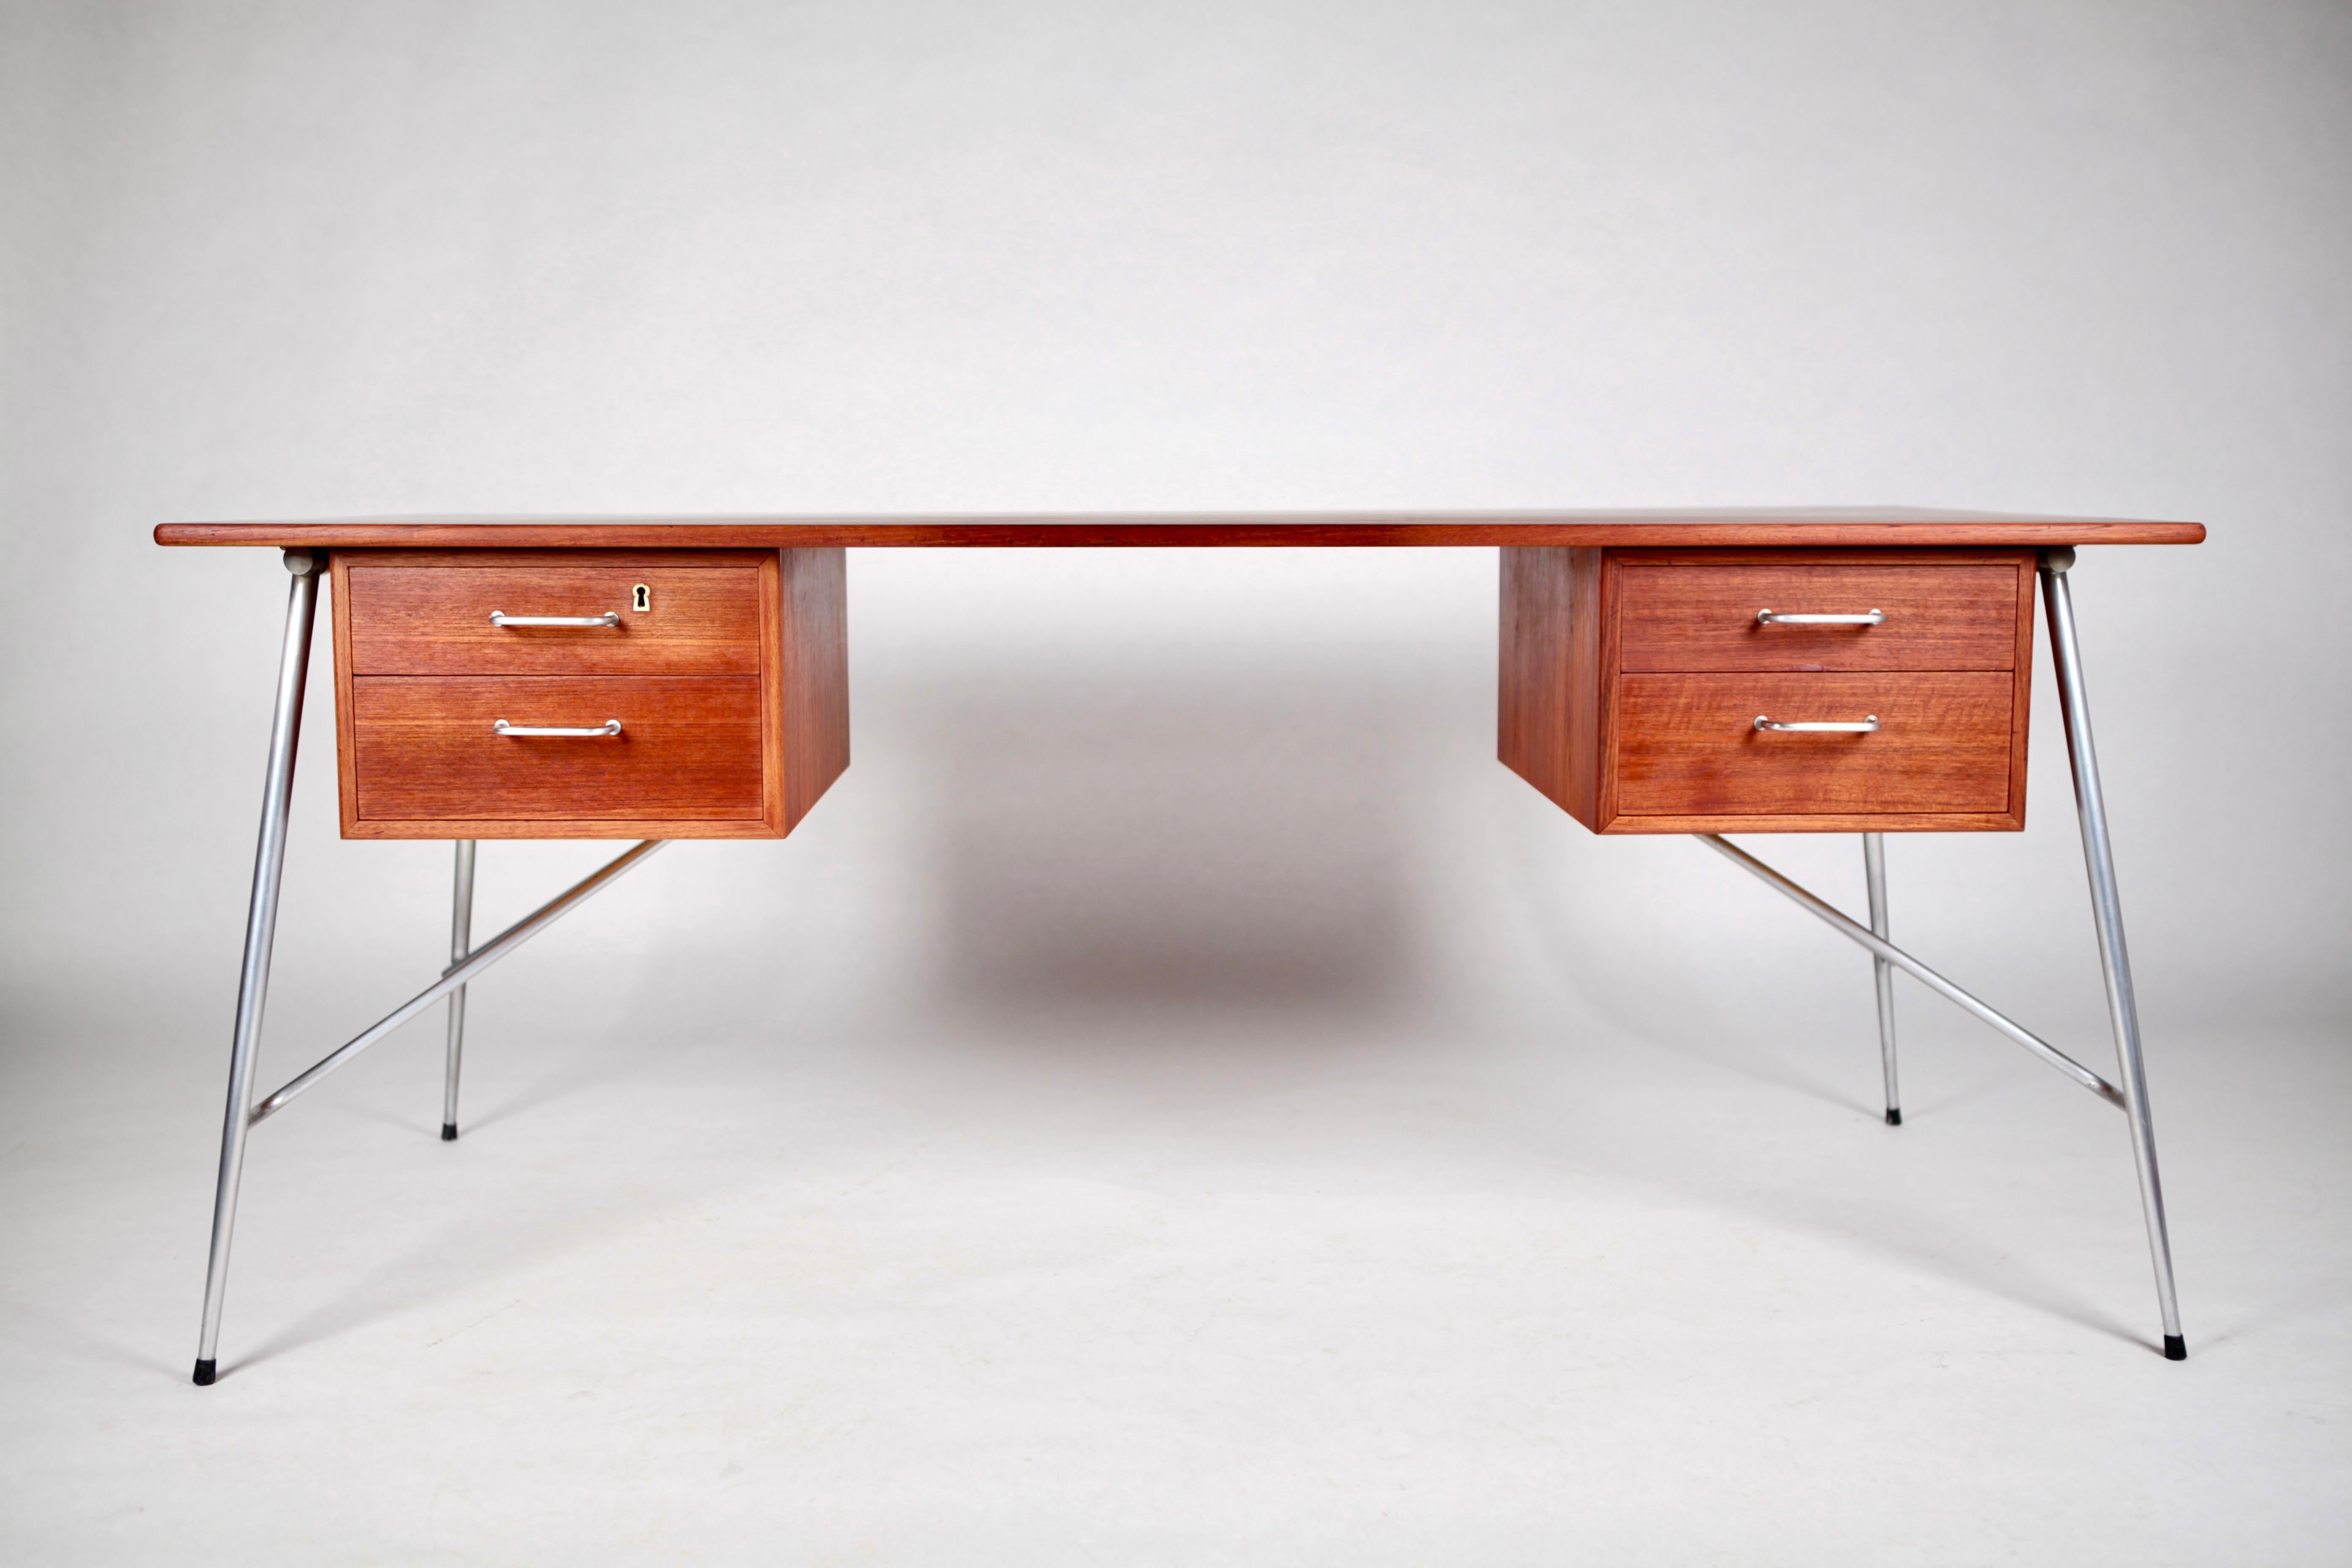 Børge Mogensen, desk in Teak and steel, model '202'.
Executed by Søborg Møbelfabrik in Denmark in the 1950s.
Excellent vintage condition.
Key not included.